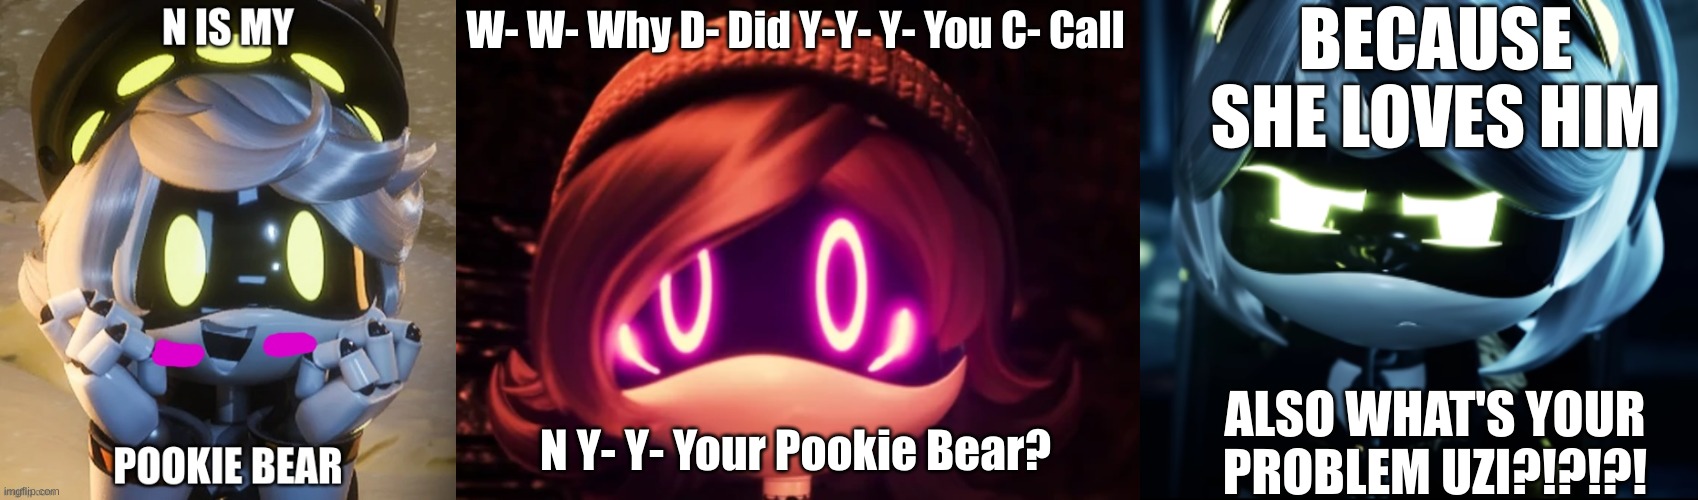 Yeah What Is Your Problem There Uzi | BECAUSE SHE LOVES HIM; W- W- Why D- Did Y-Y- Y- You C- Call; N Y- Y- Your Pookie Bear? ALSO WHAT'S YOUR PROBLEM UZI?!?!?! | image tagged in uzi shocked in horror,angy v,murder drones | made w/ Imgflip meme maker